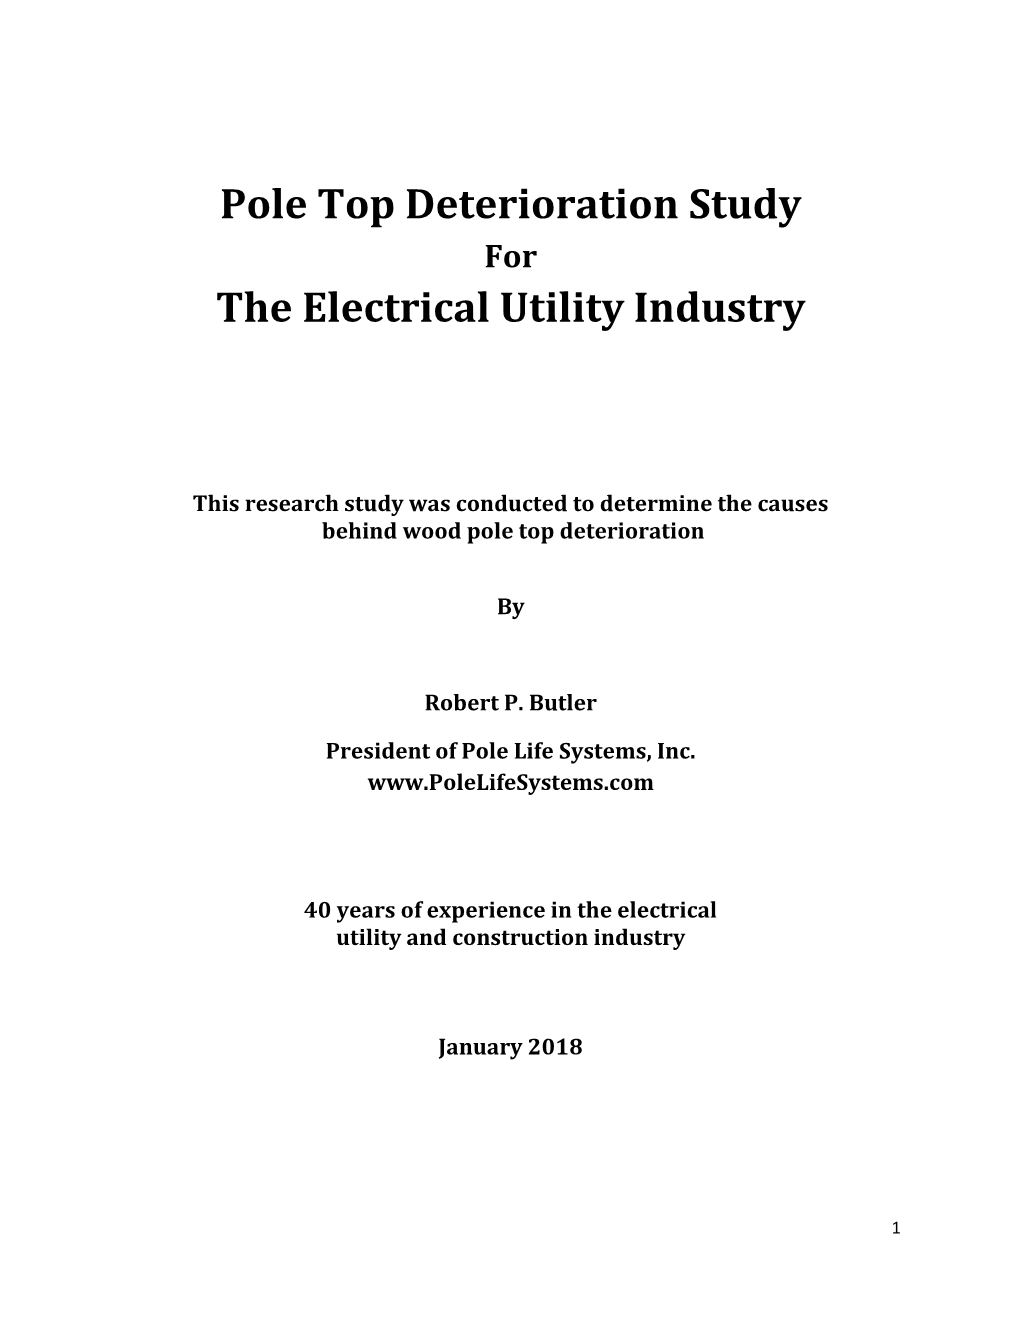 Pole Top Deterioration Study the Electrical Utility Industry